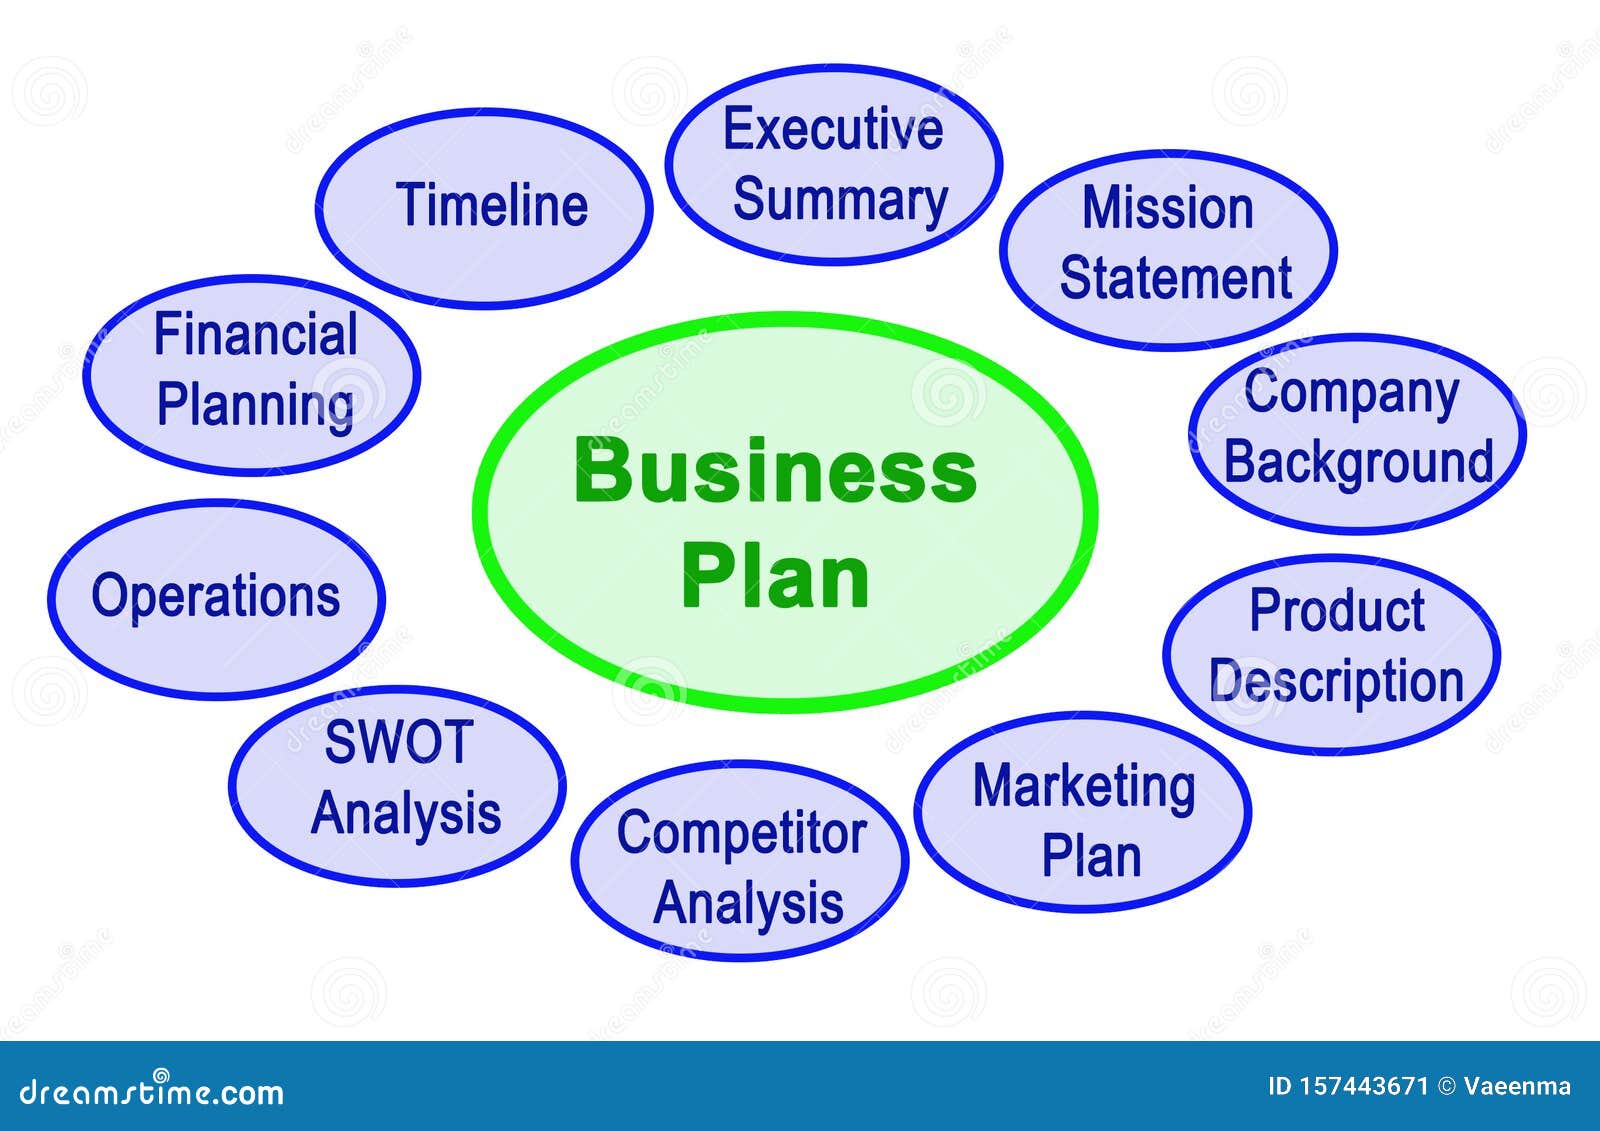 describe main components of business plan